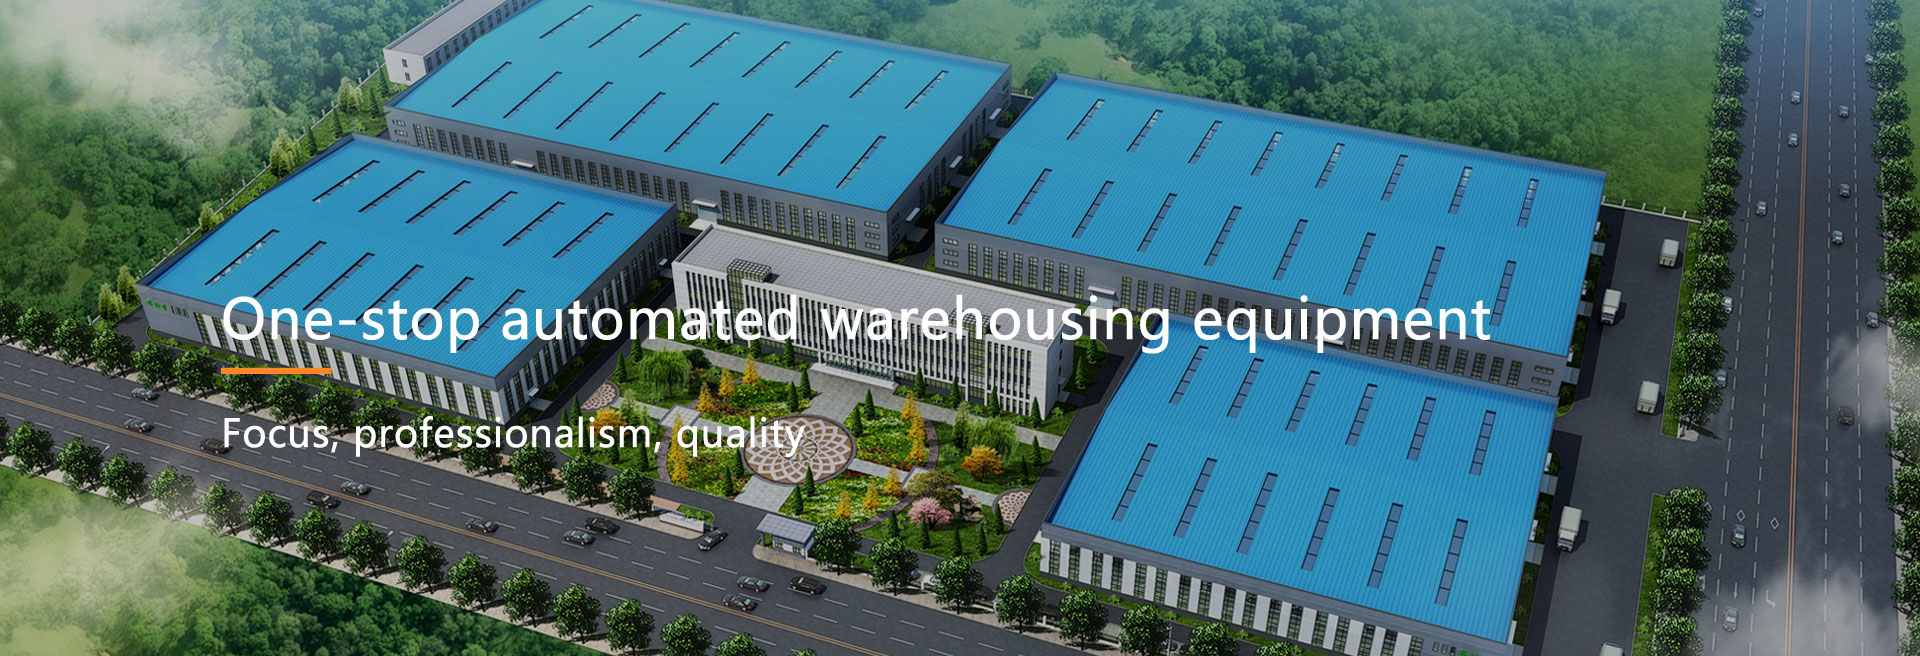 One-stop automated warehousing equipment